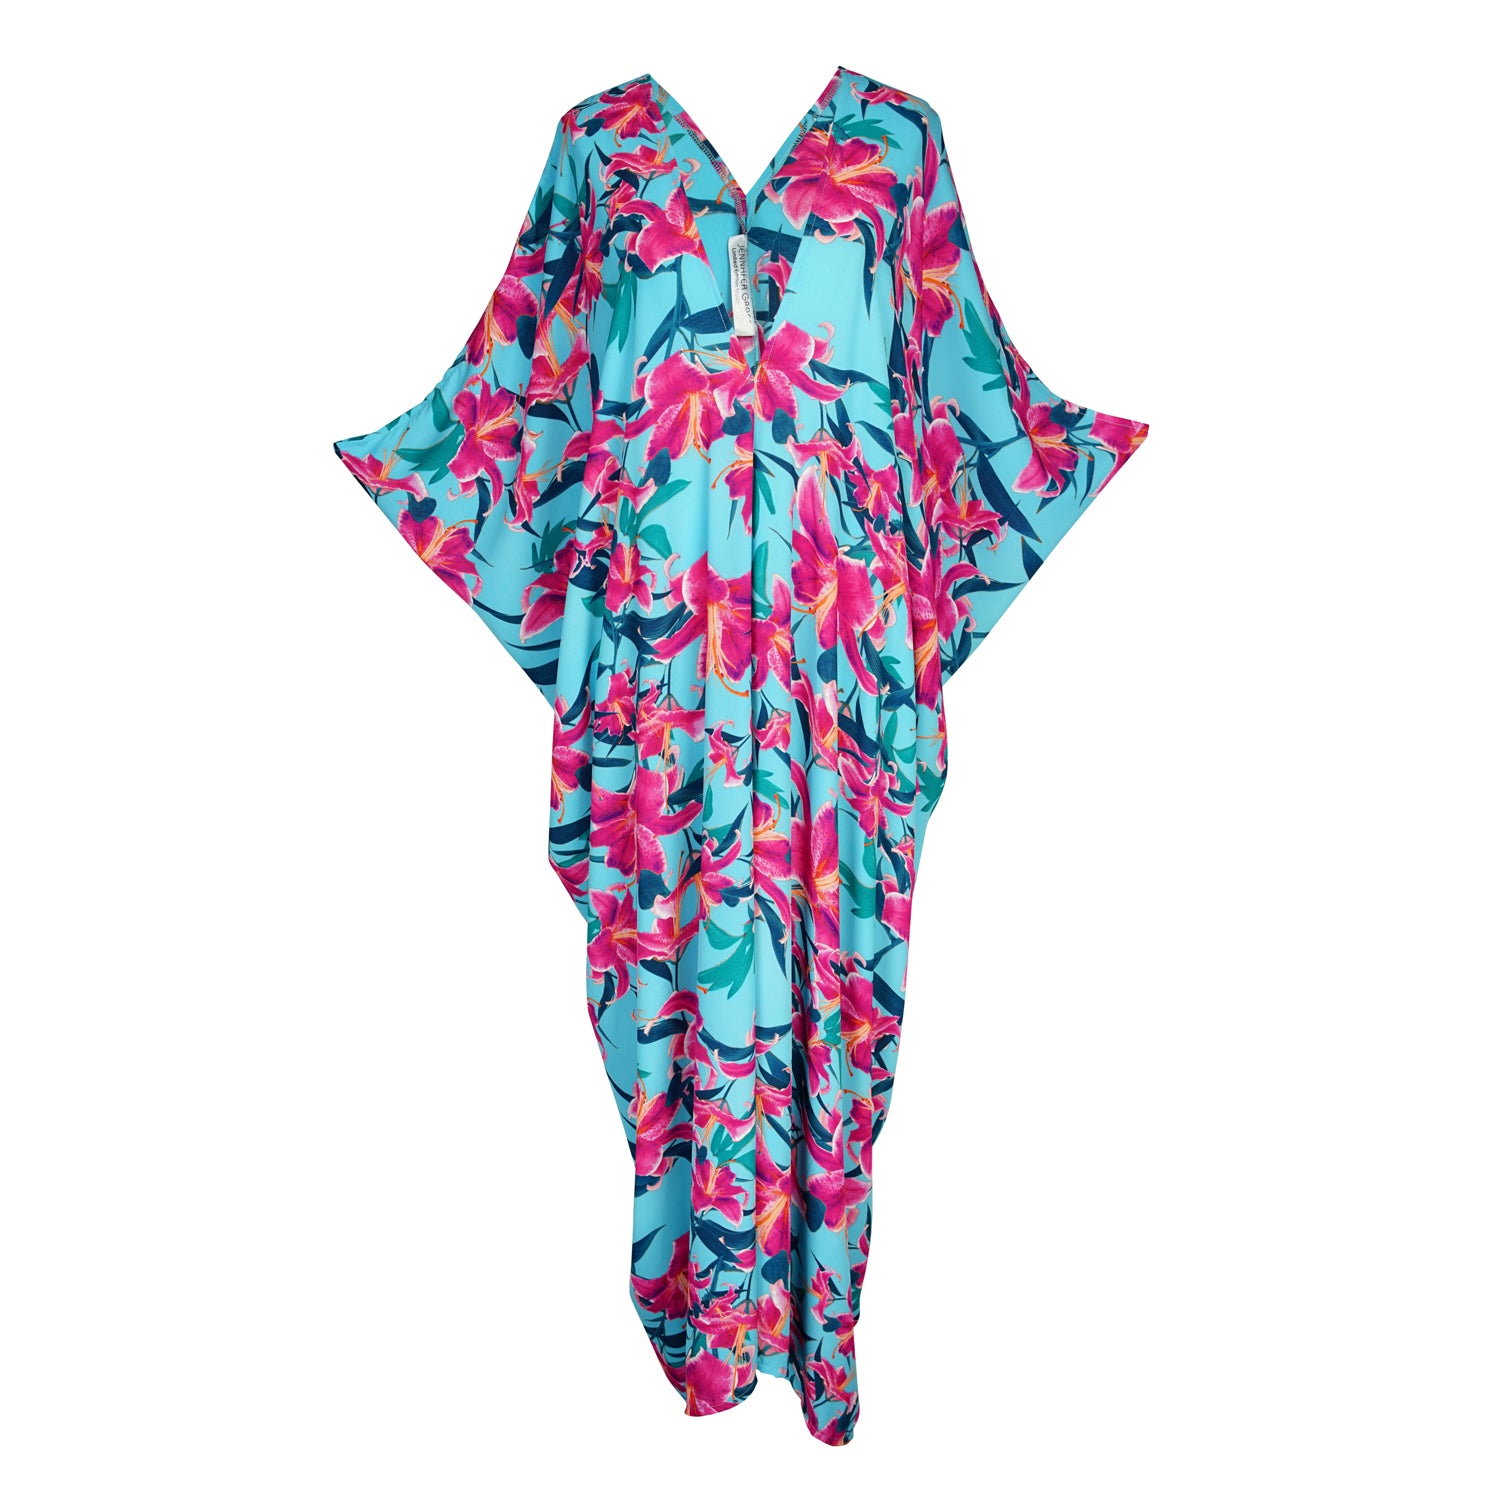 Light aqua blue caftan with fuchsia hot pink floral stargazer lily print and dark green leaves, vibrant colorful kaftan with deep v and short batwing sleeves, bohemian style